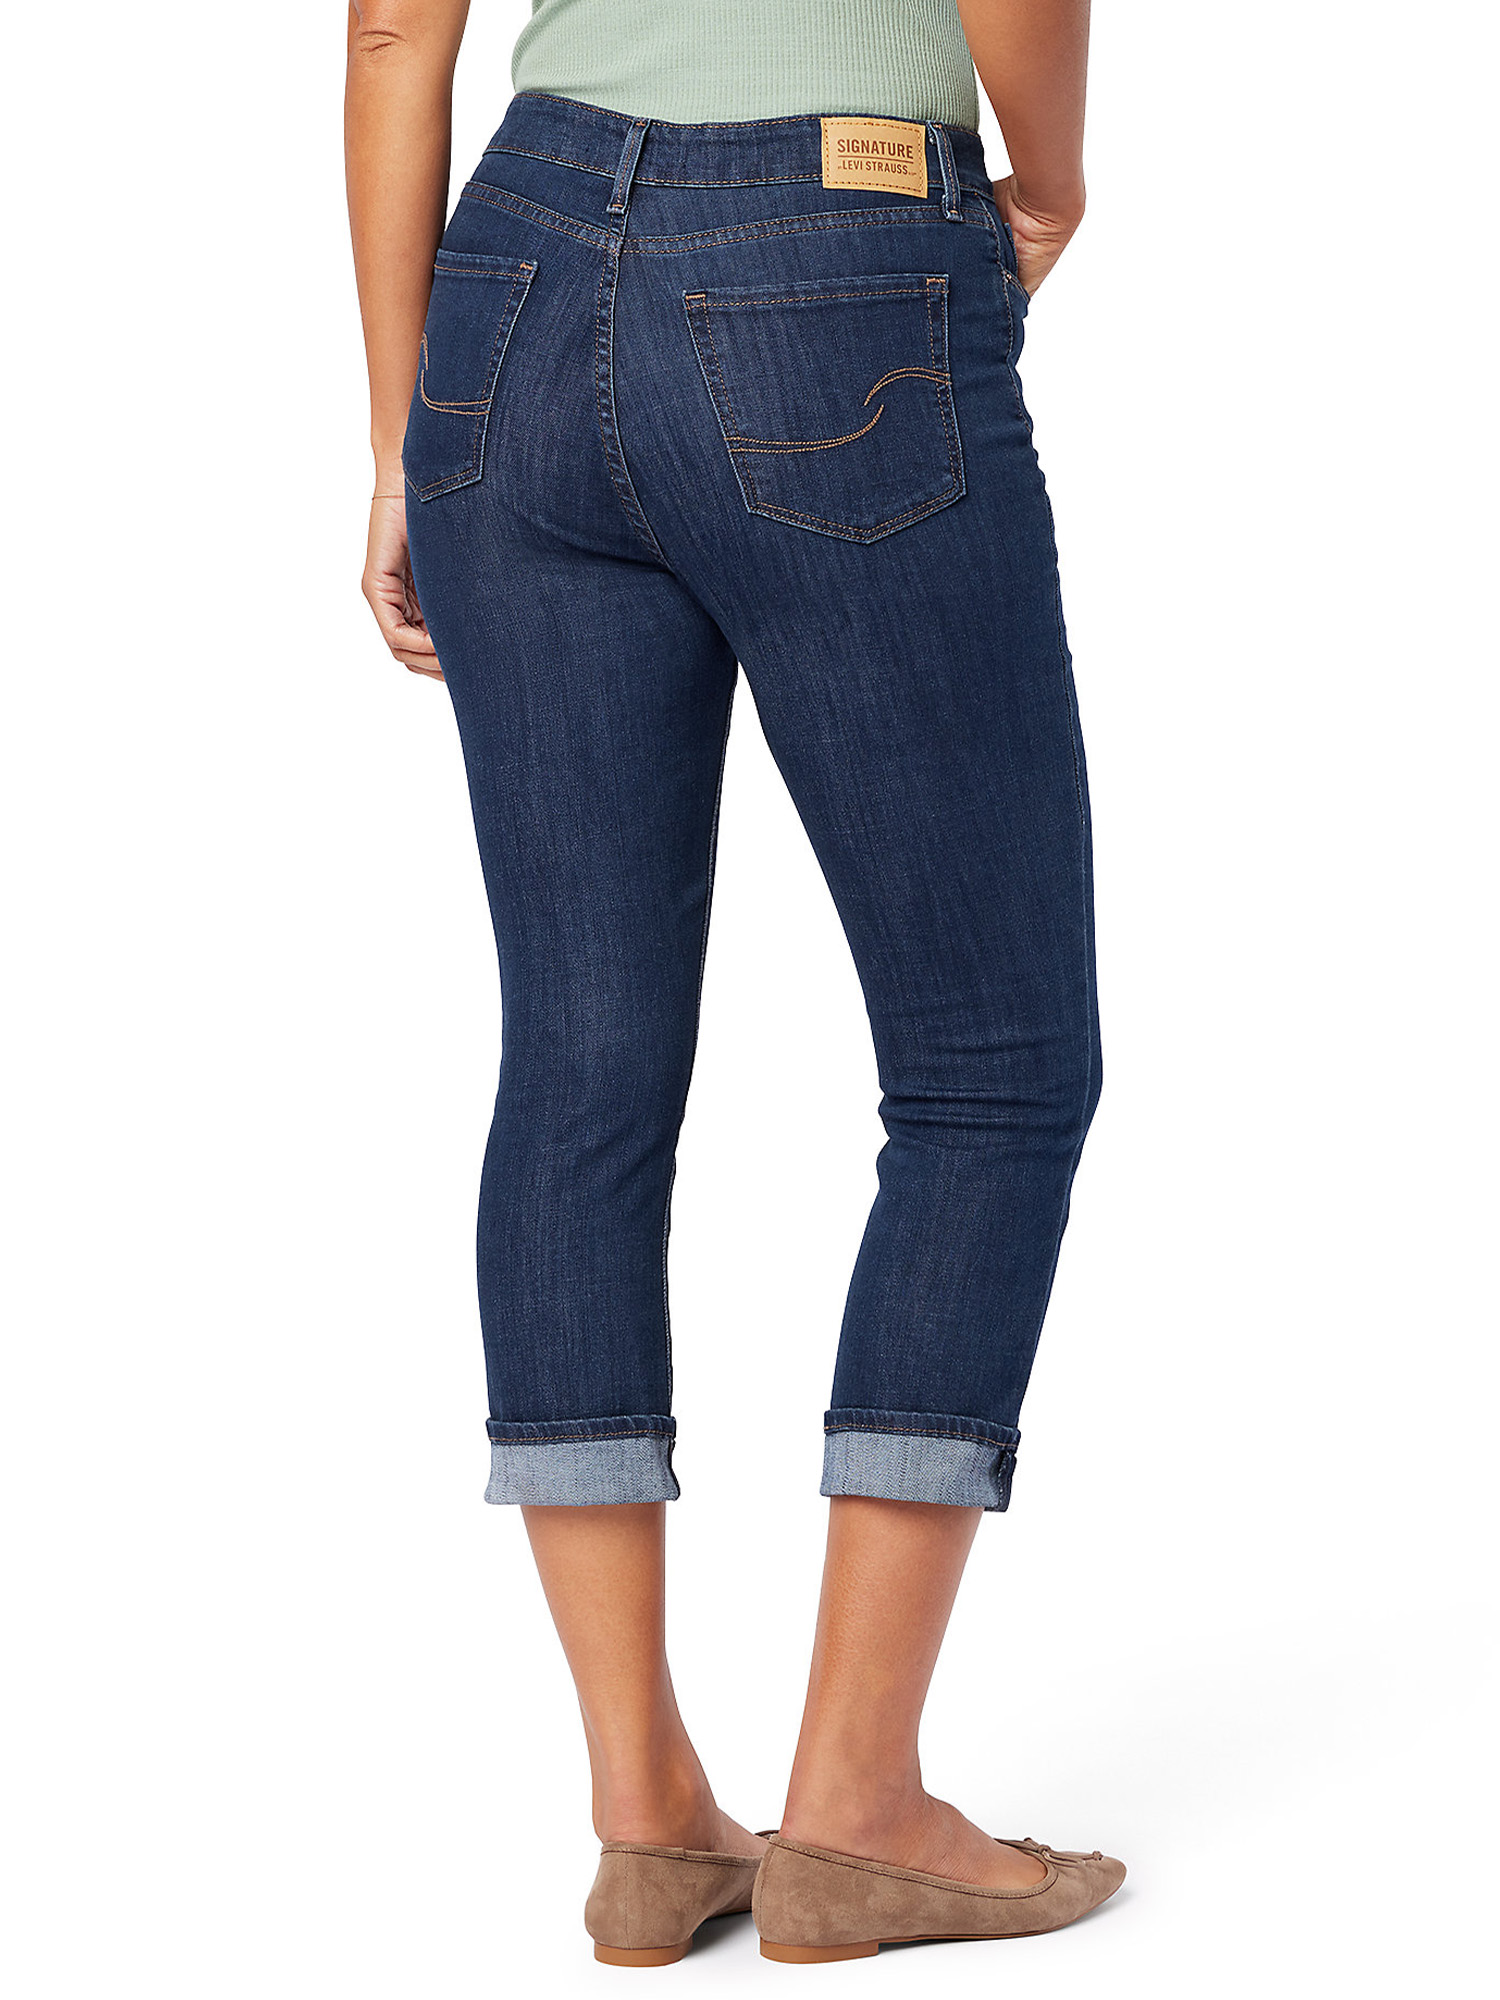 Signature by Levi Strauss & Co. Women's and Women's Plus Mid Rise Capri Jeans, Sizes 0-28 - image 3 of 5